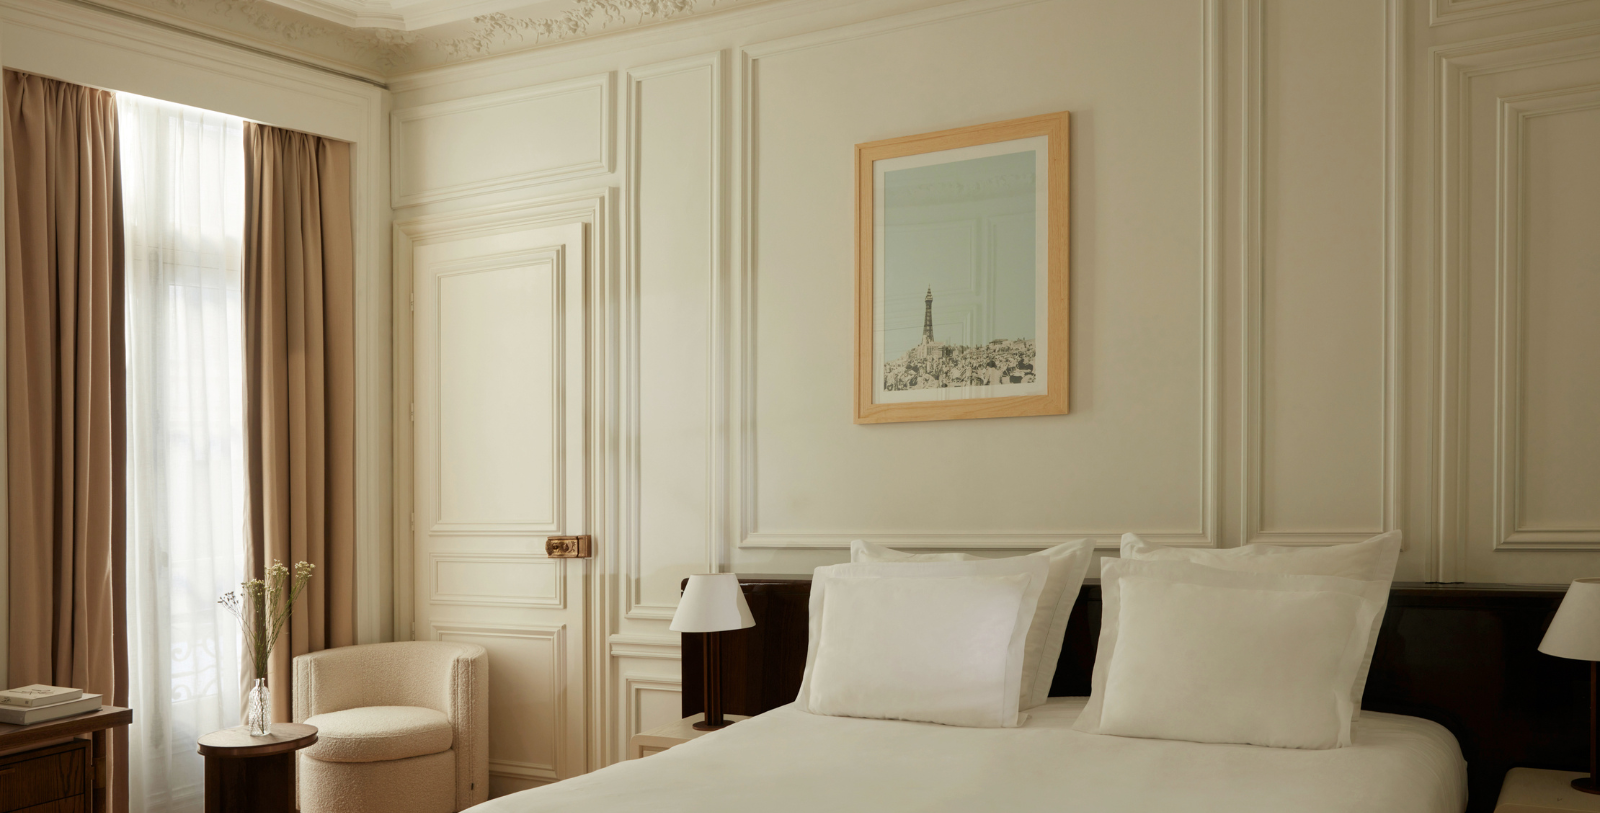 Image of a Prestige Room at Maison Delano Paris, a member of Historic Hotels Worldwide since 2023, located in Paris, France